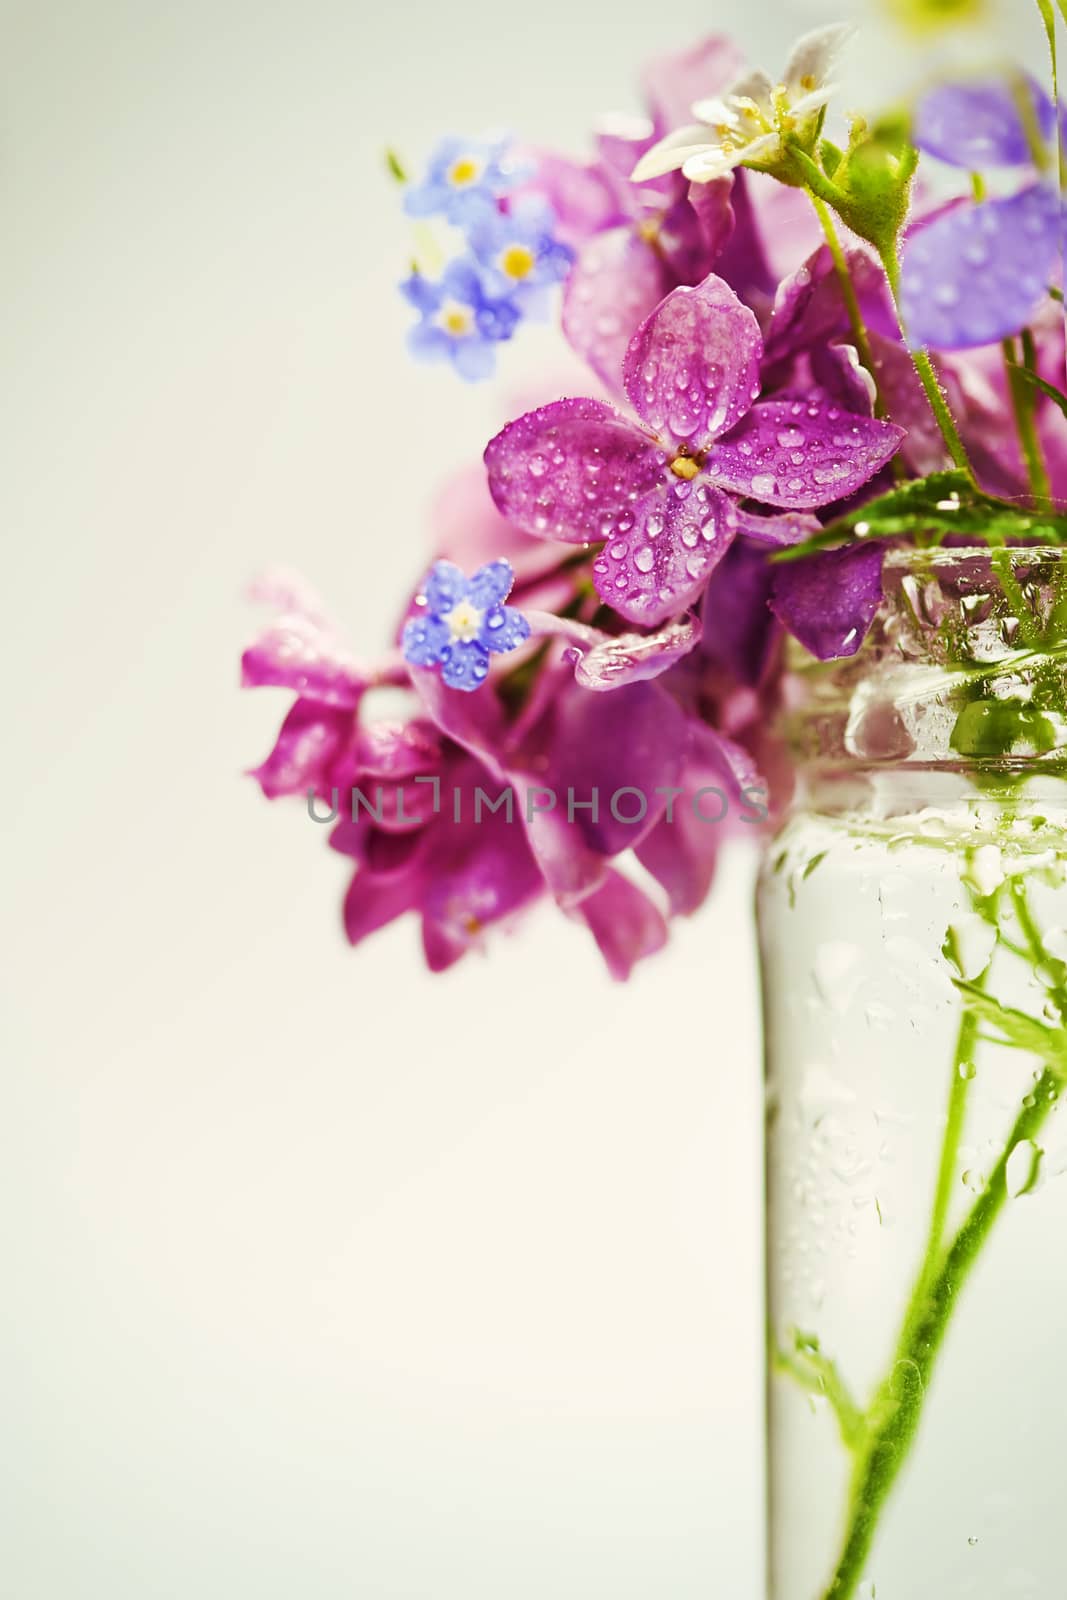 Beautiful spring flowers in a vase on white background